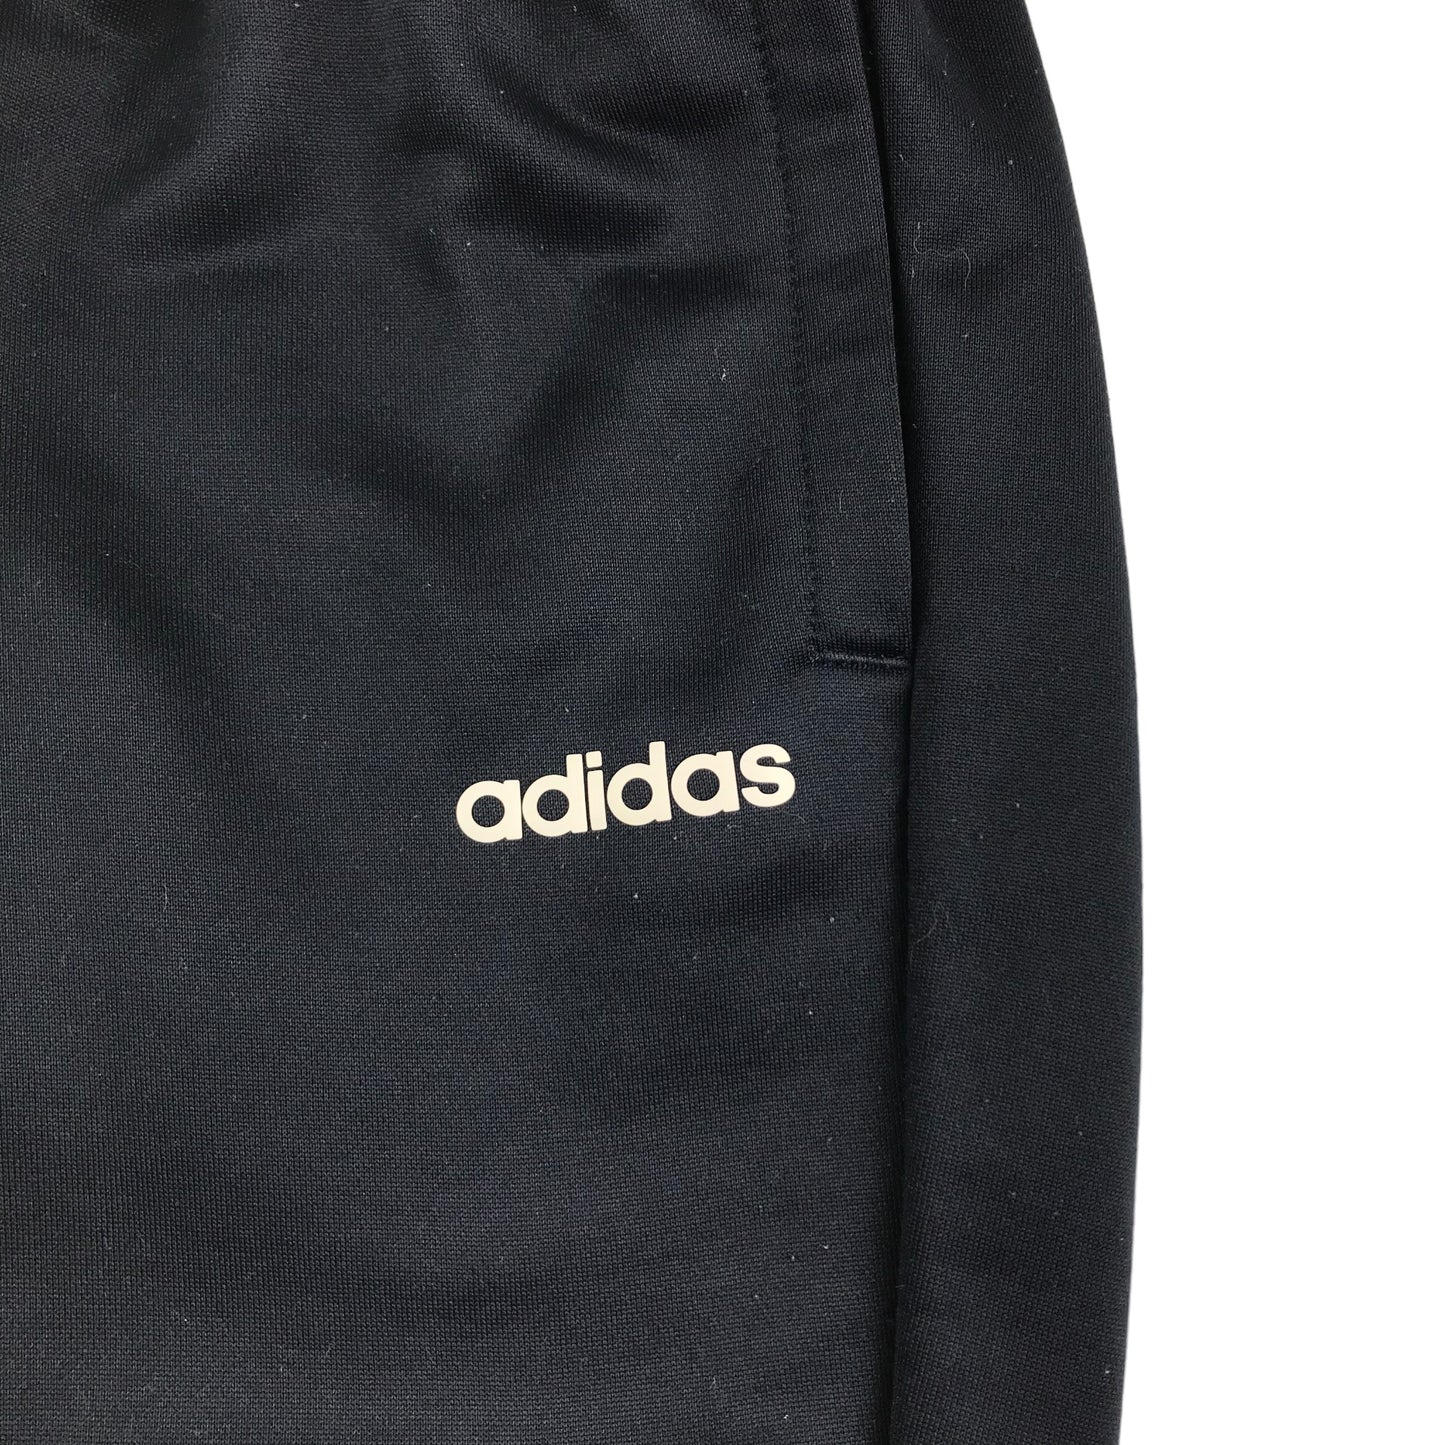 Adidas Joggers Age 9 Navy Tracksuit Bottoms